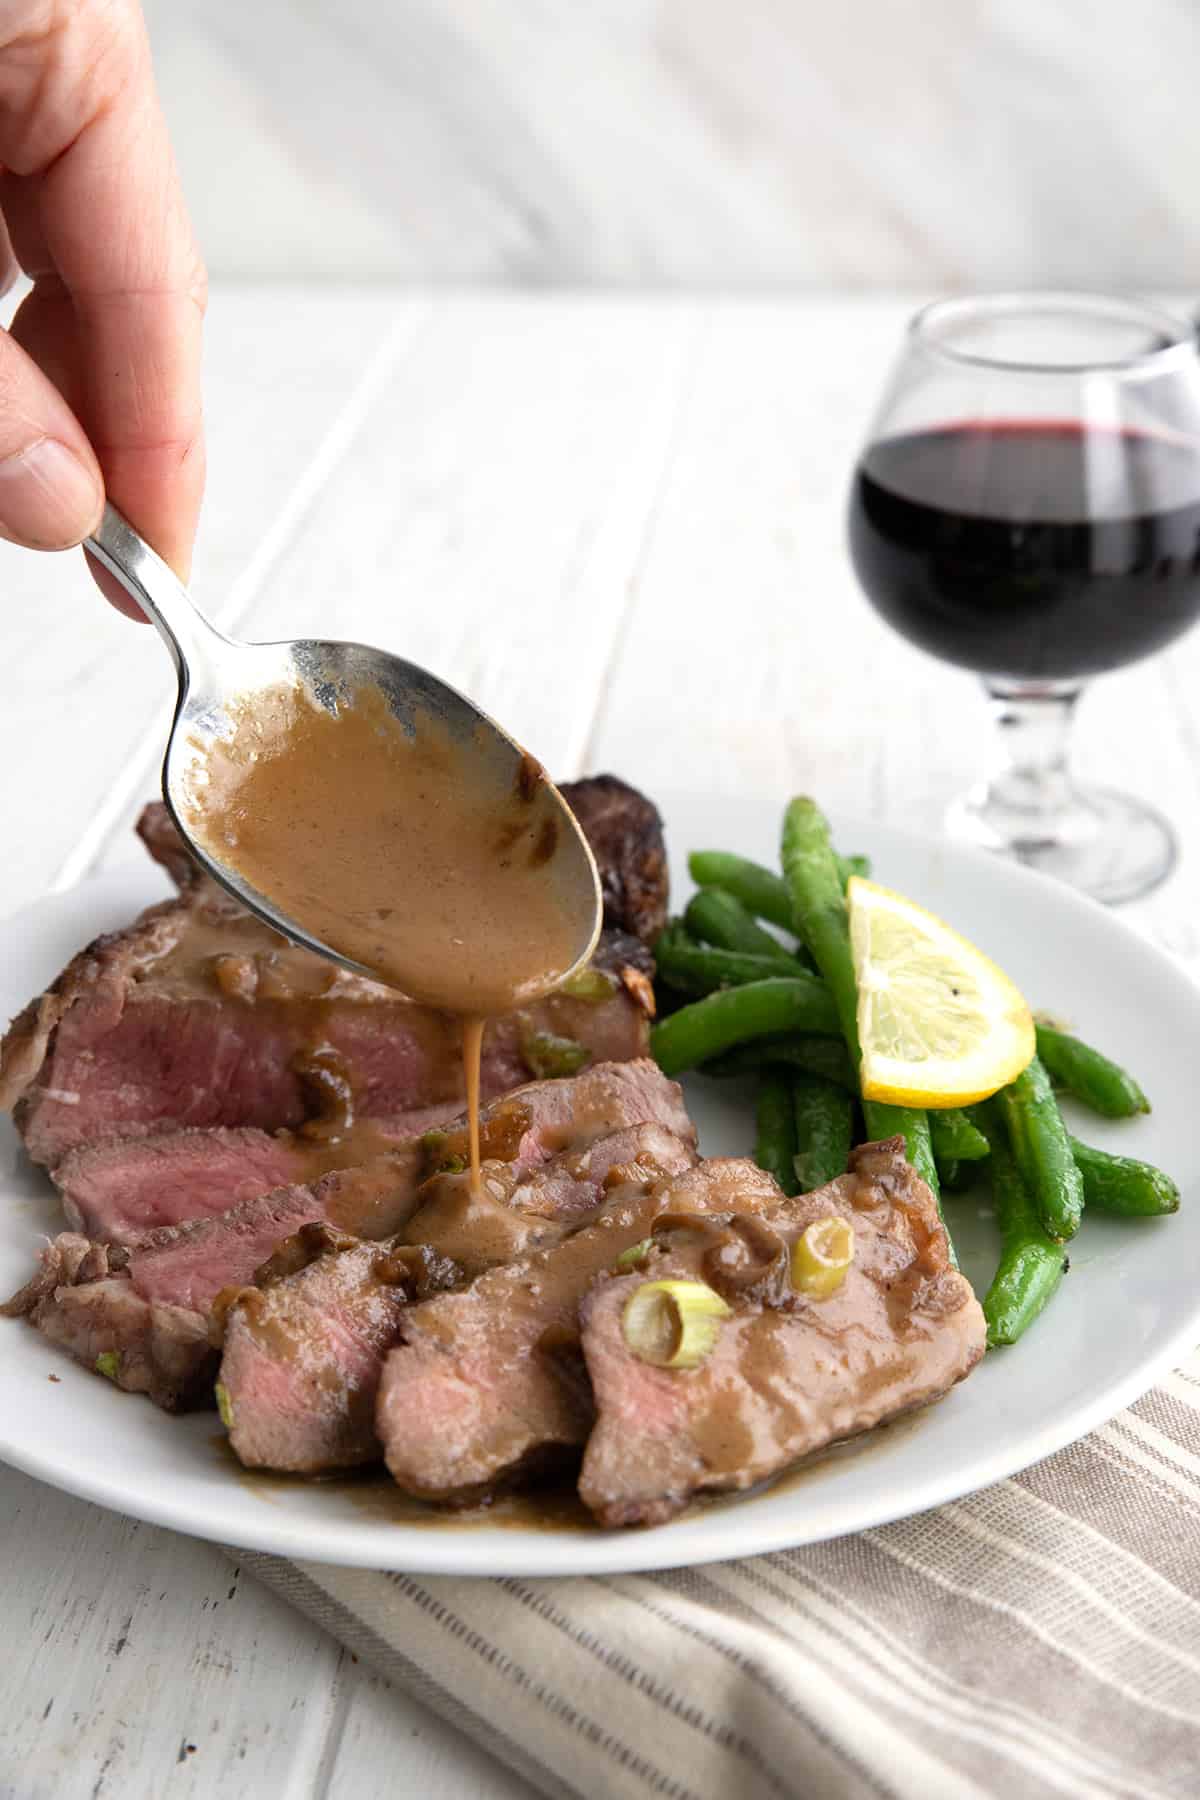 A spoon pouring sauce over steak Diane with a glass of wine in the background.